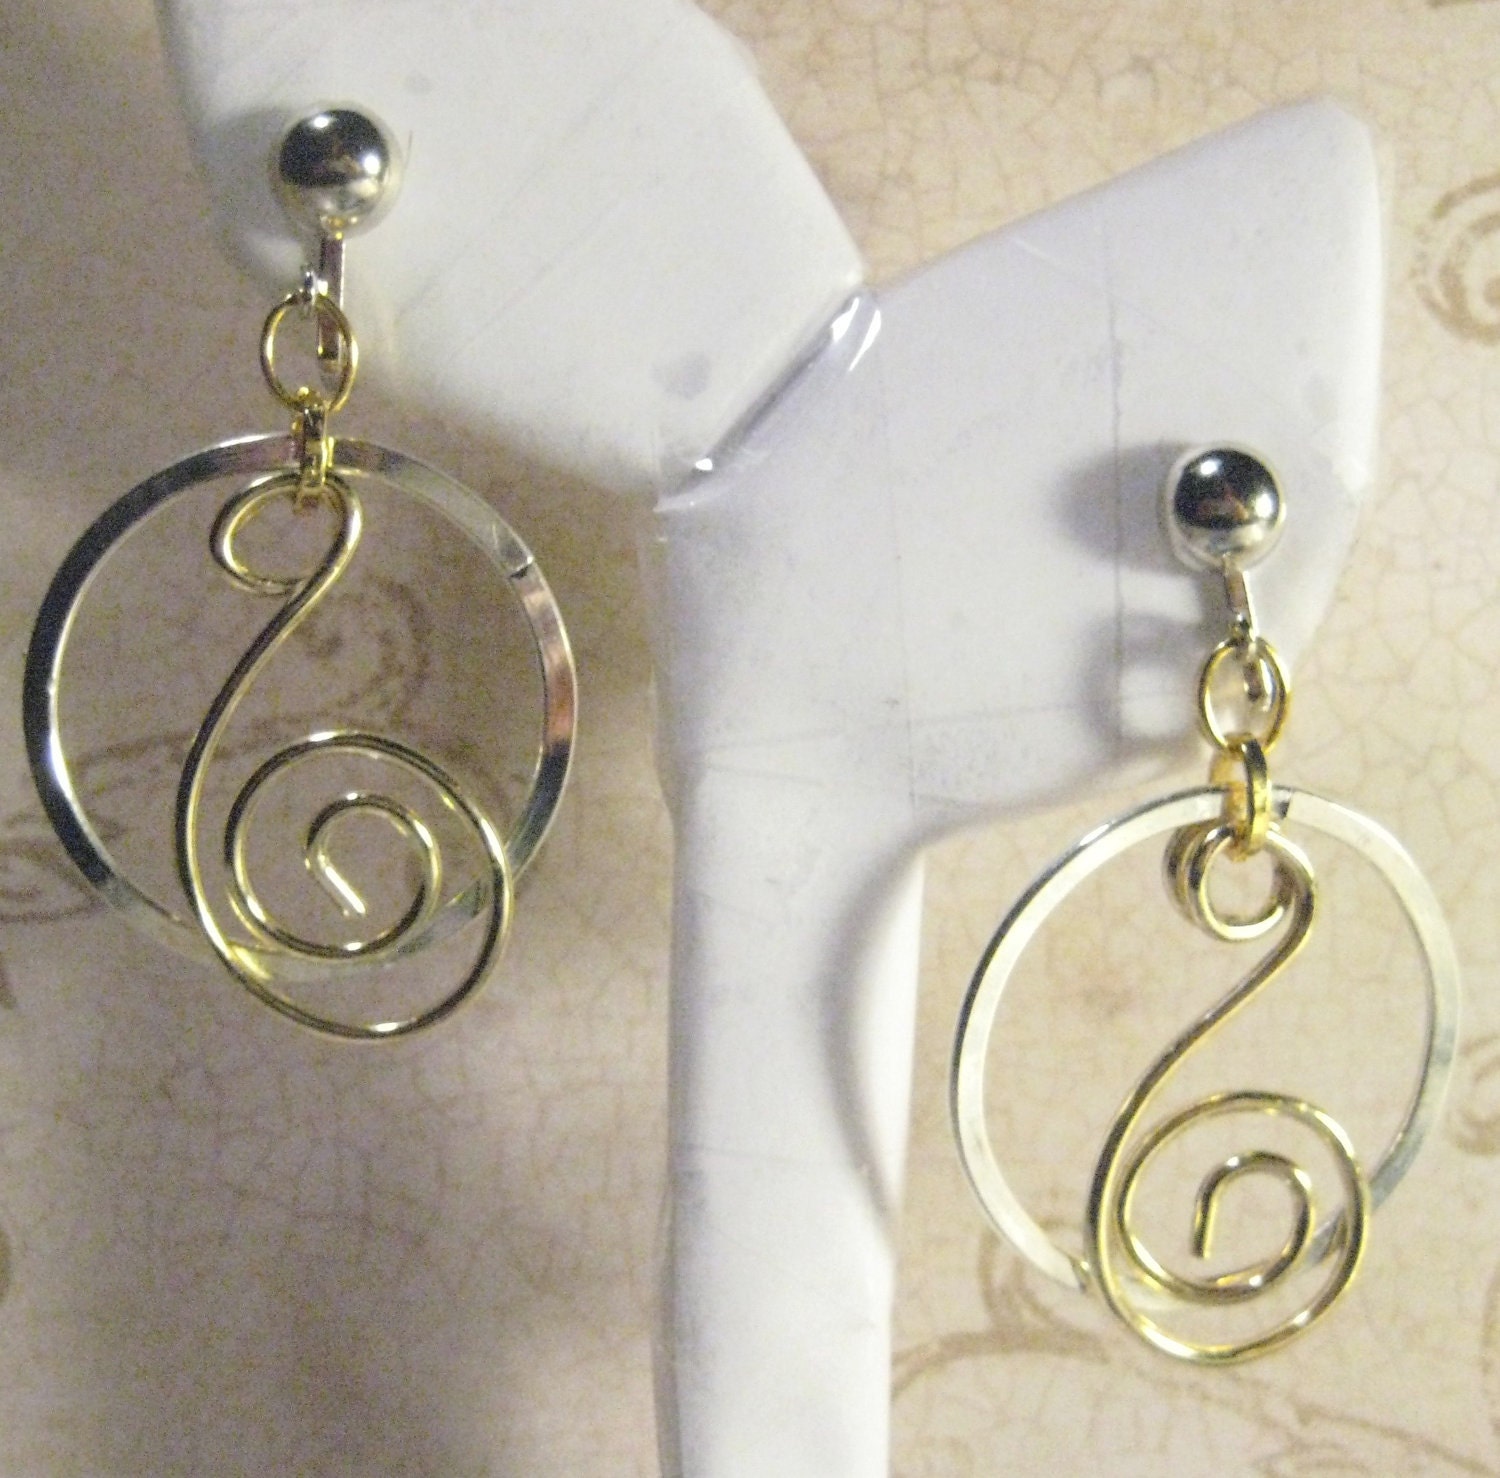 Handmade Artisan Wire Wrap Silver and Gold Clip On Hoop Earrings